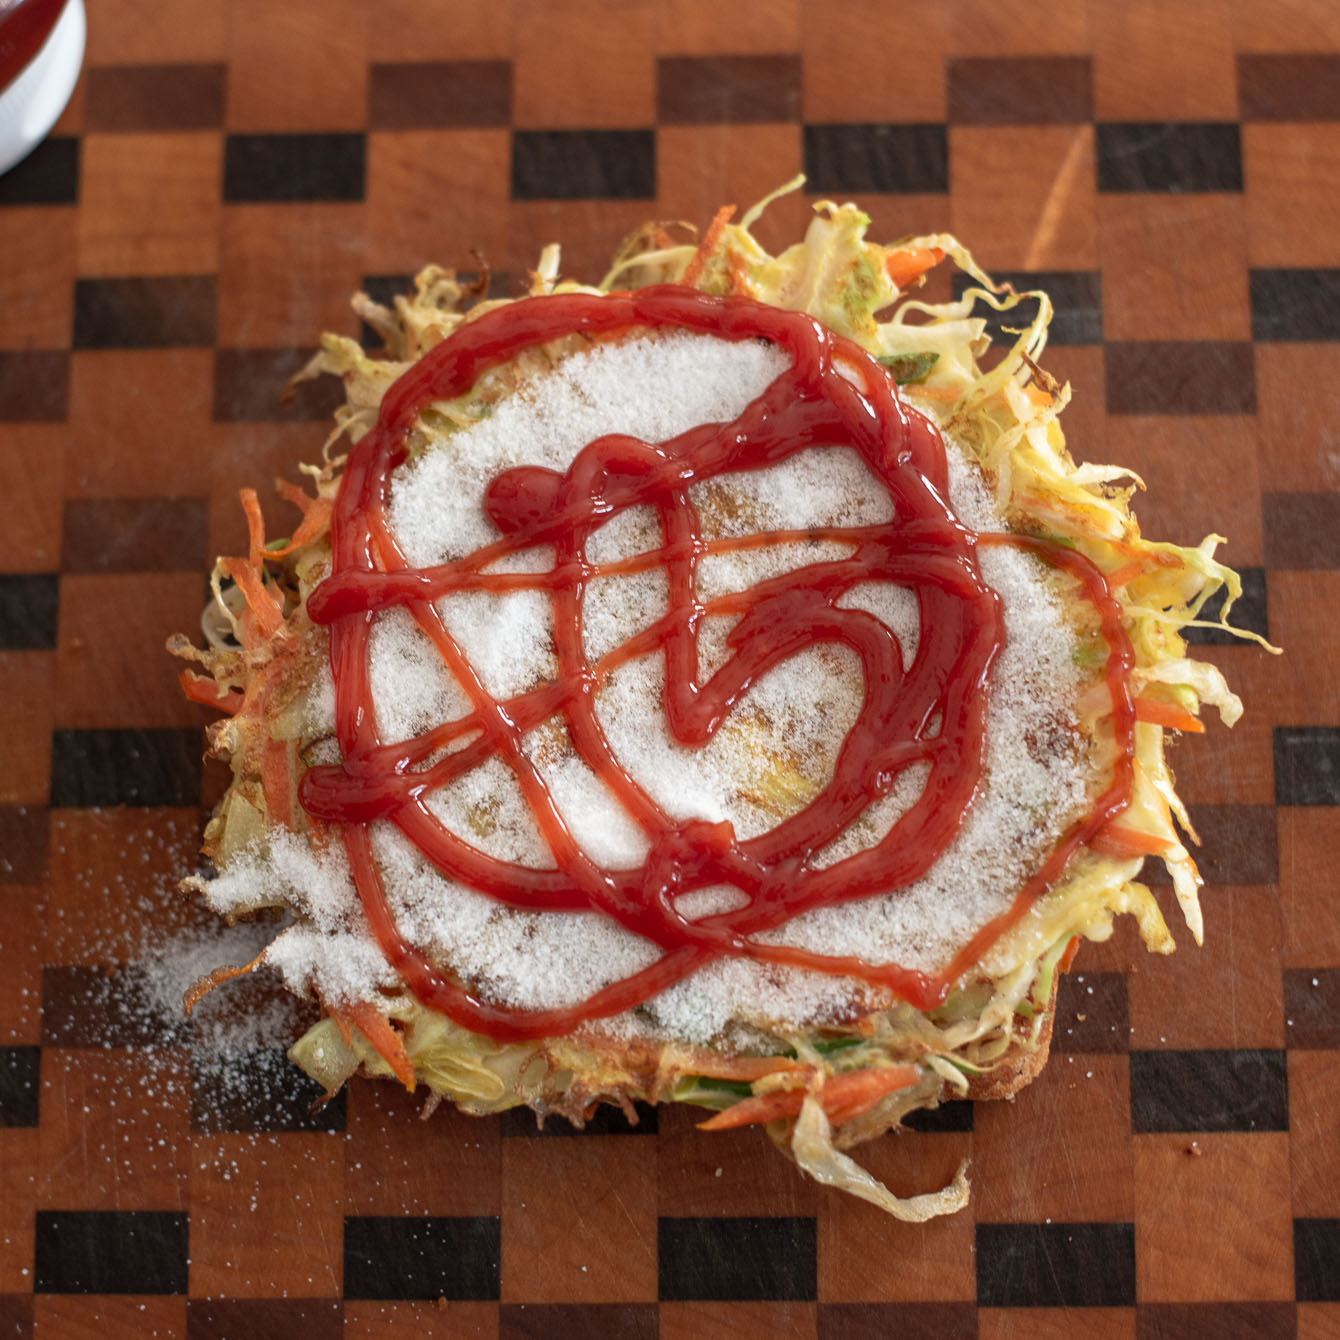 Ketchup is squirted on top of sugar with egg omelette for Korean street toast.